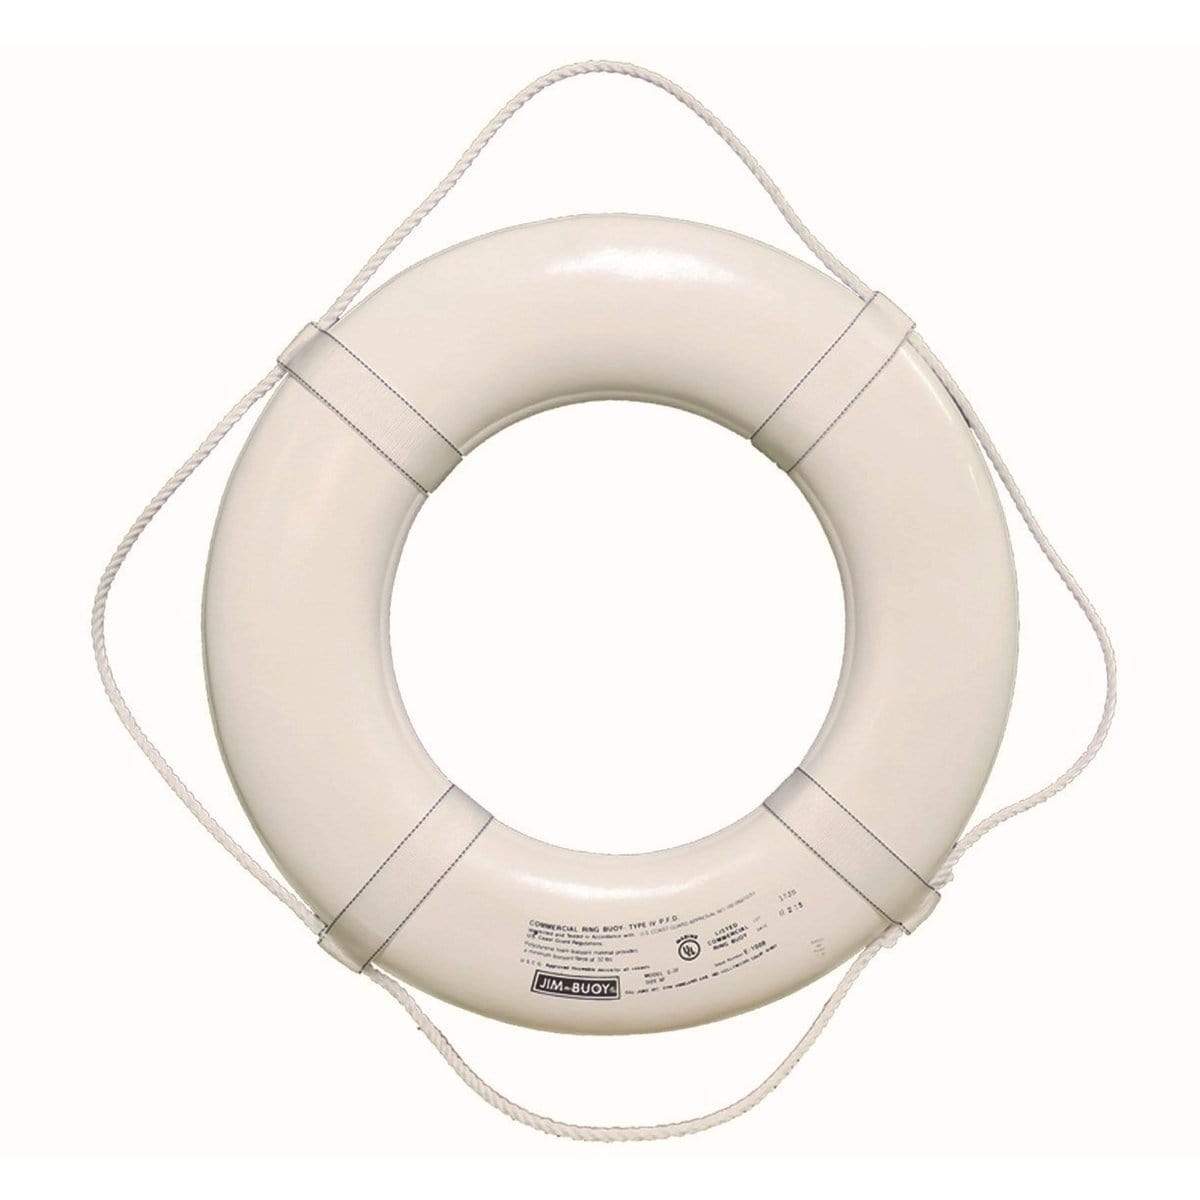 Cal-june Qualifies for Free Shipping Cal-June Ring Buoy 30" White GW-30